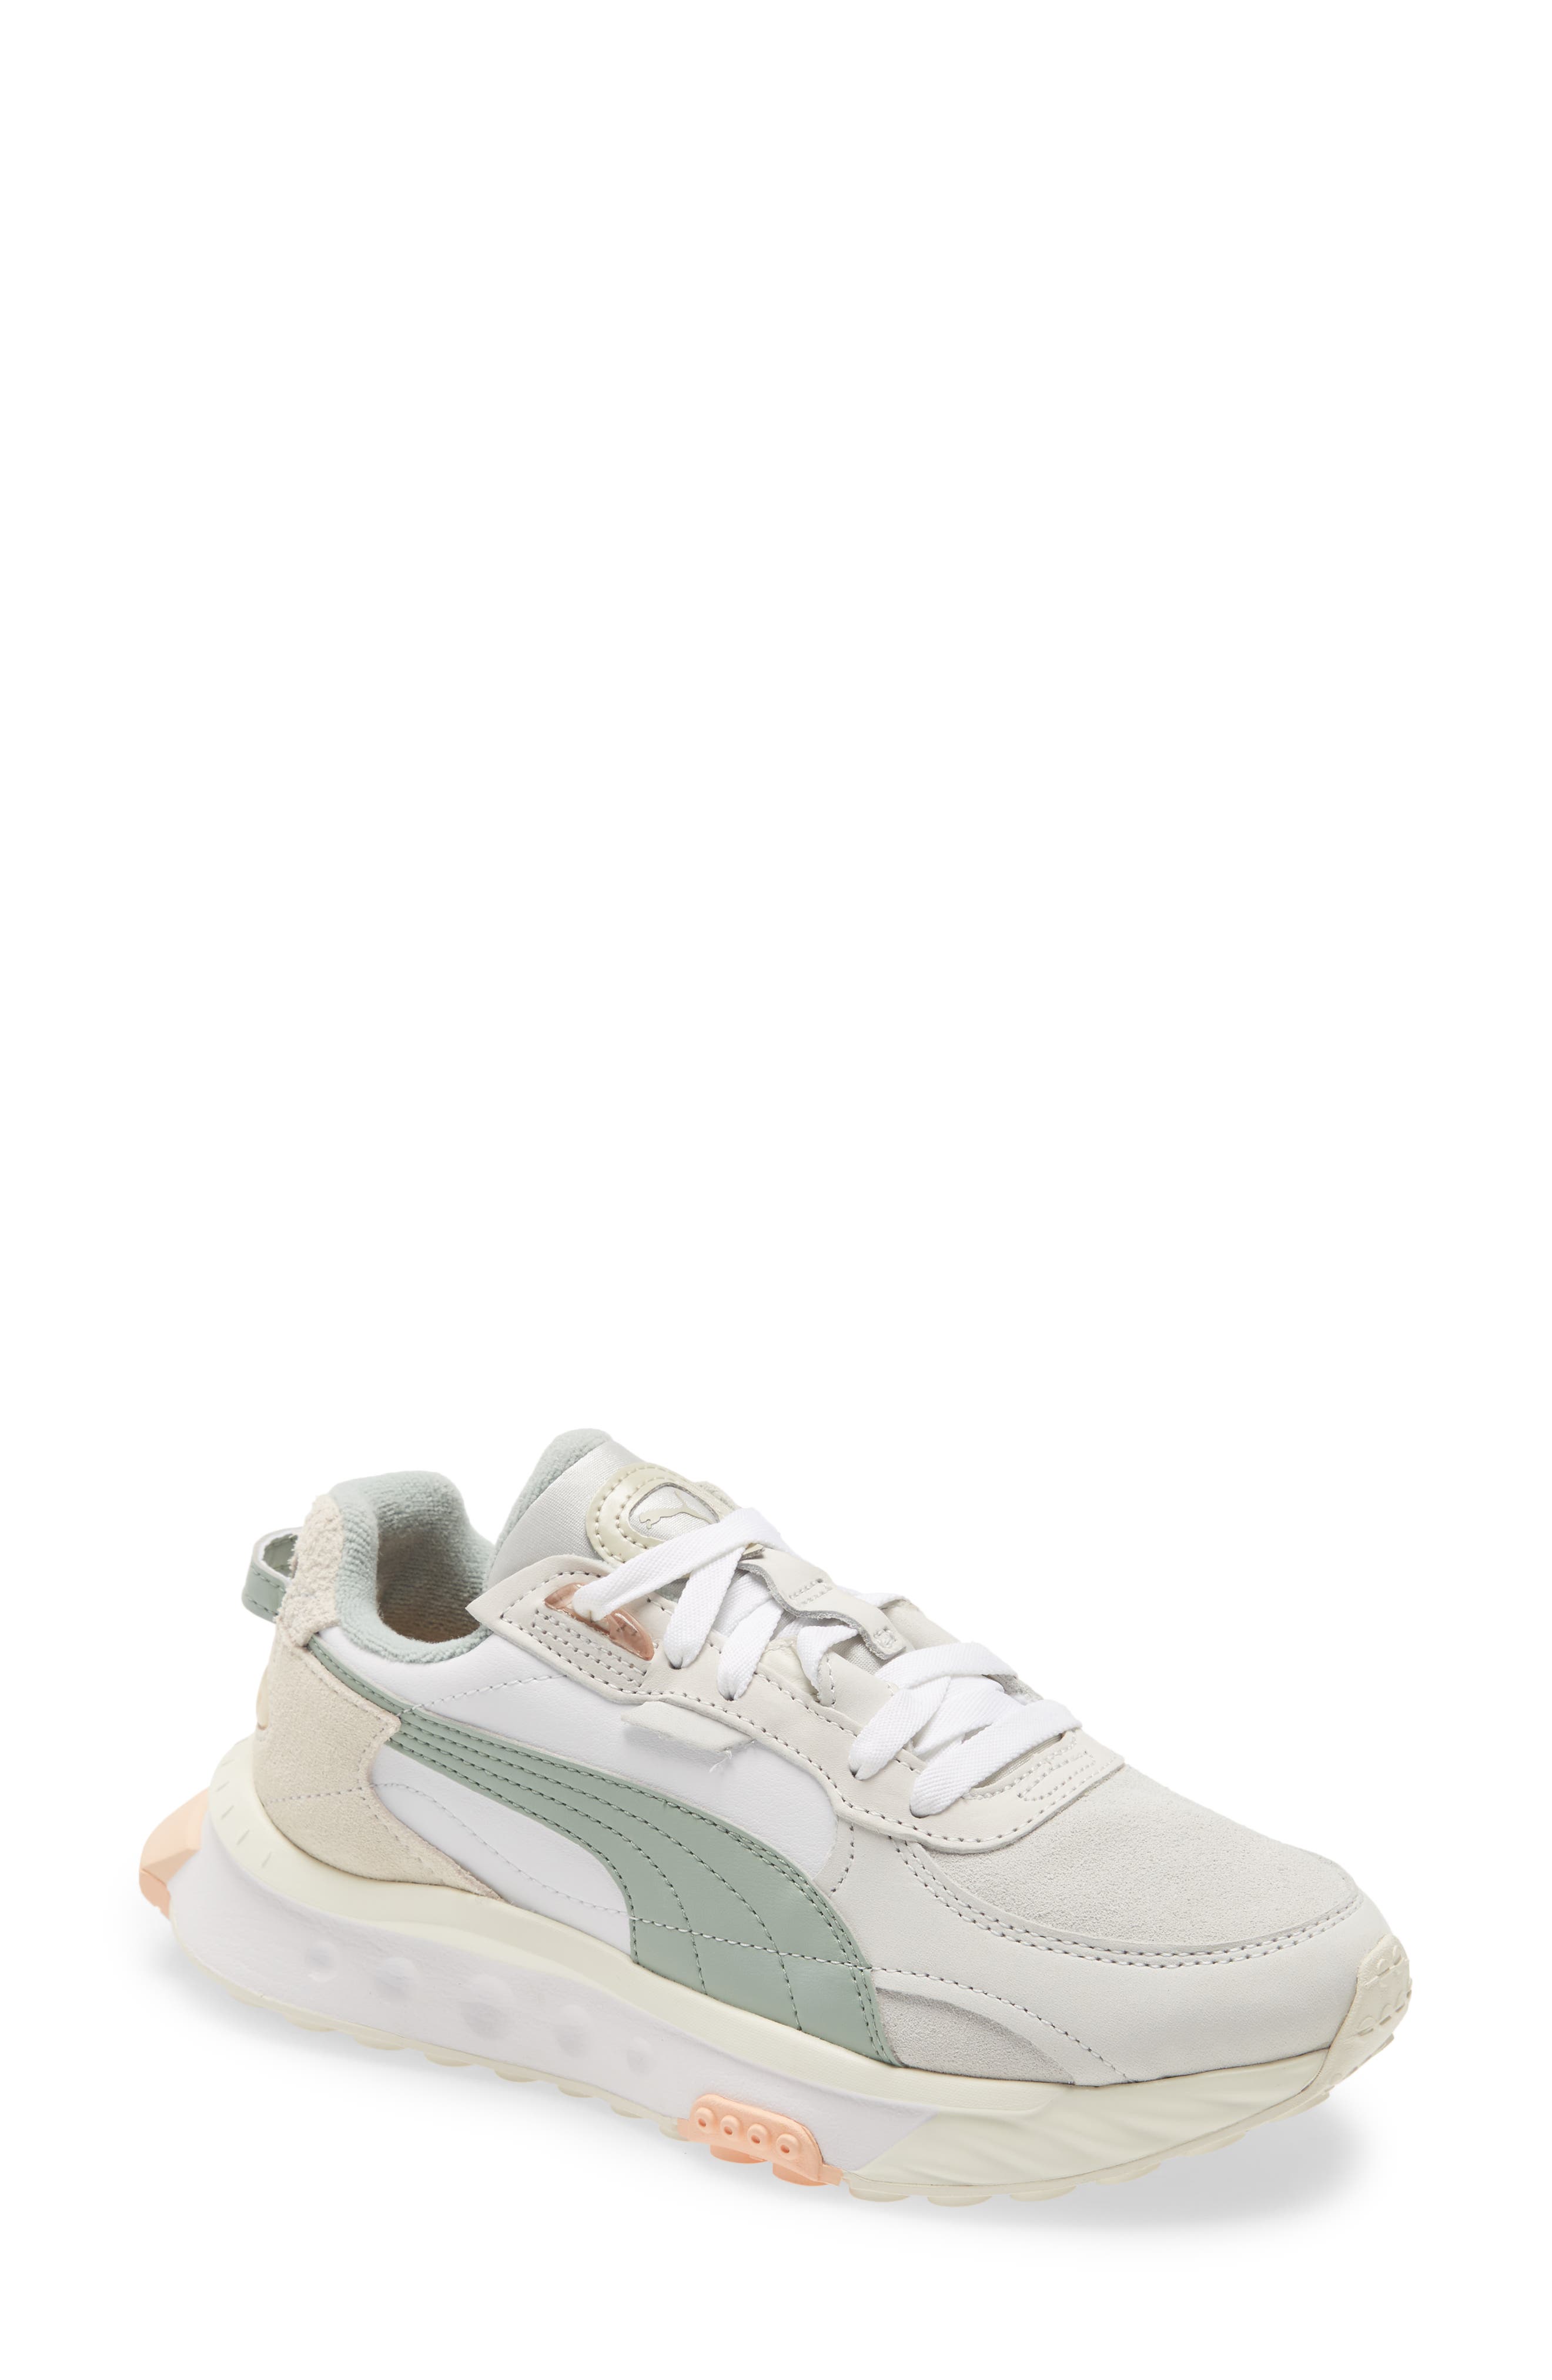 puma sneakers clear bottom